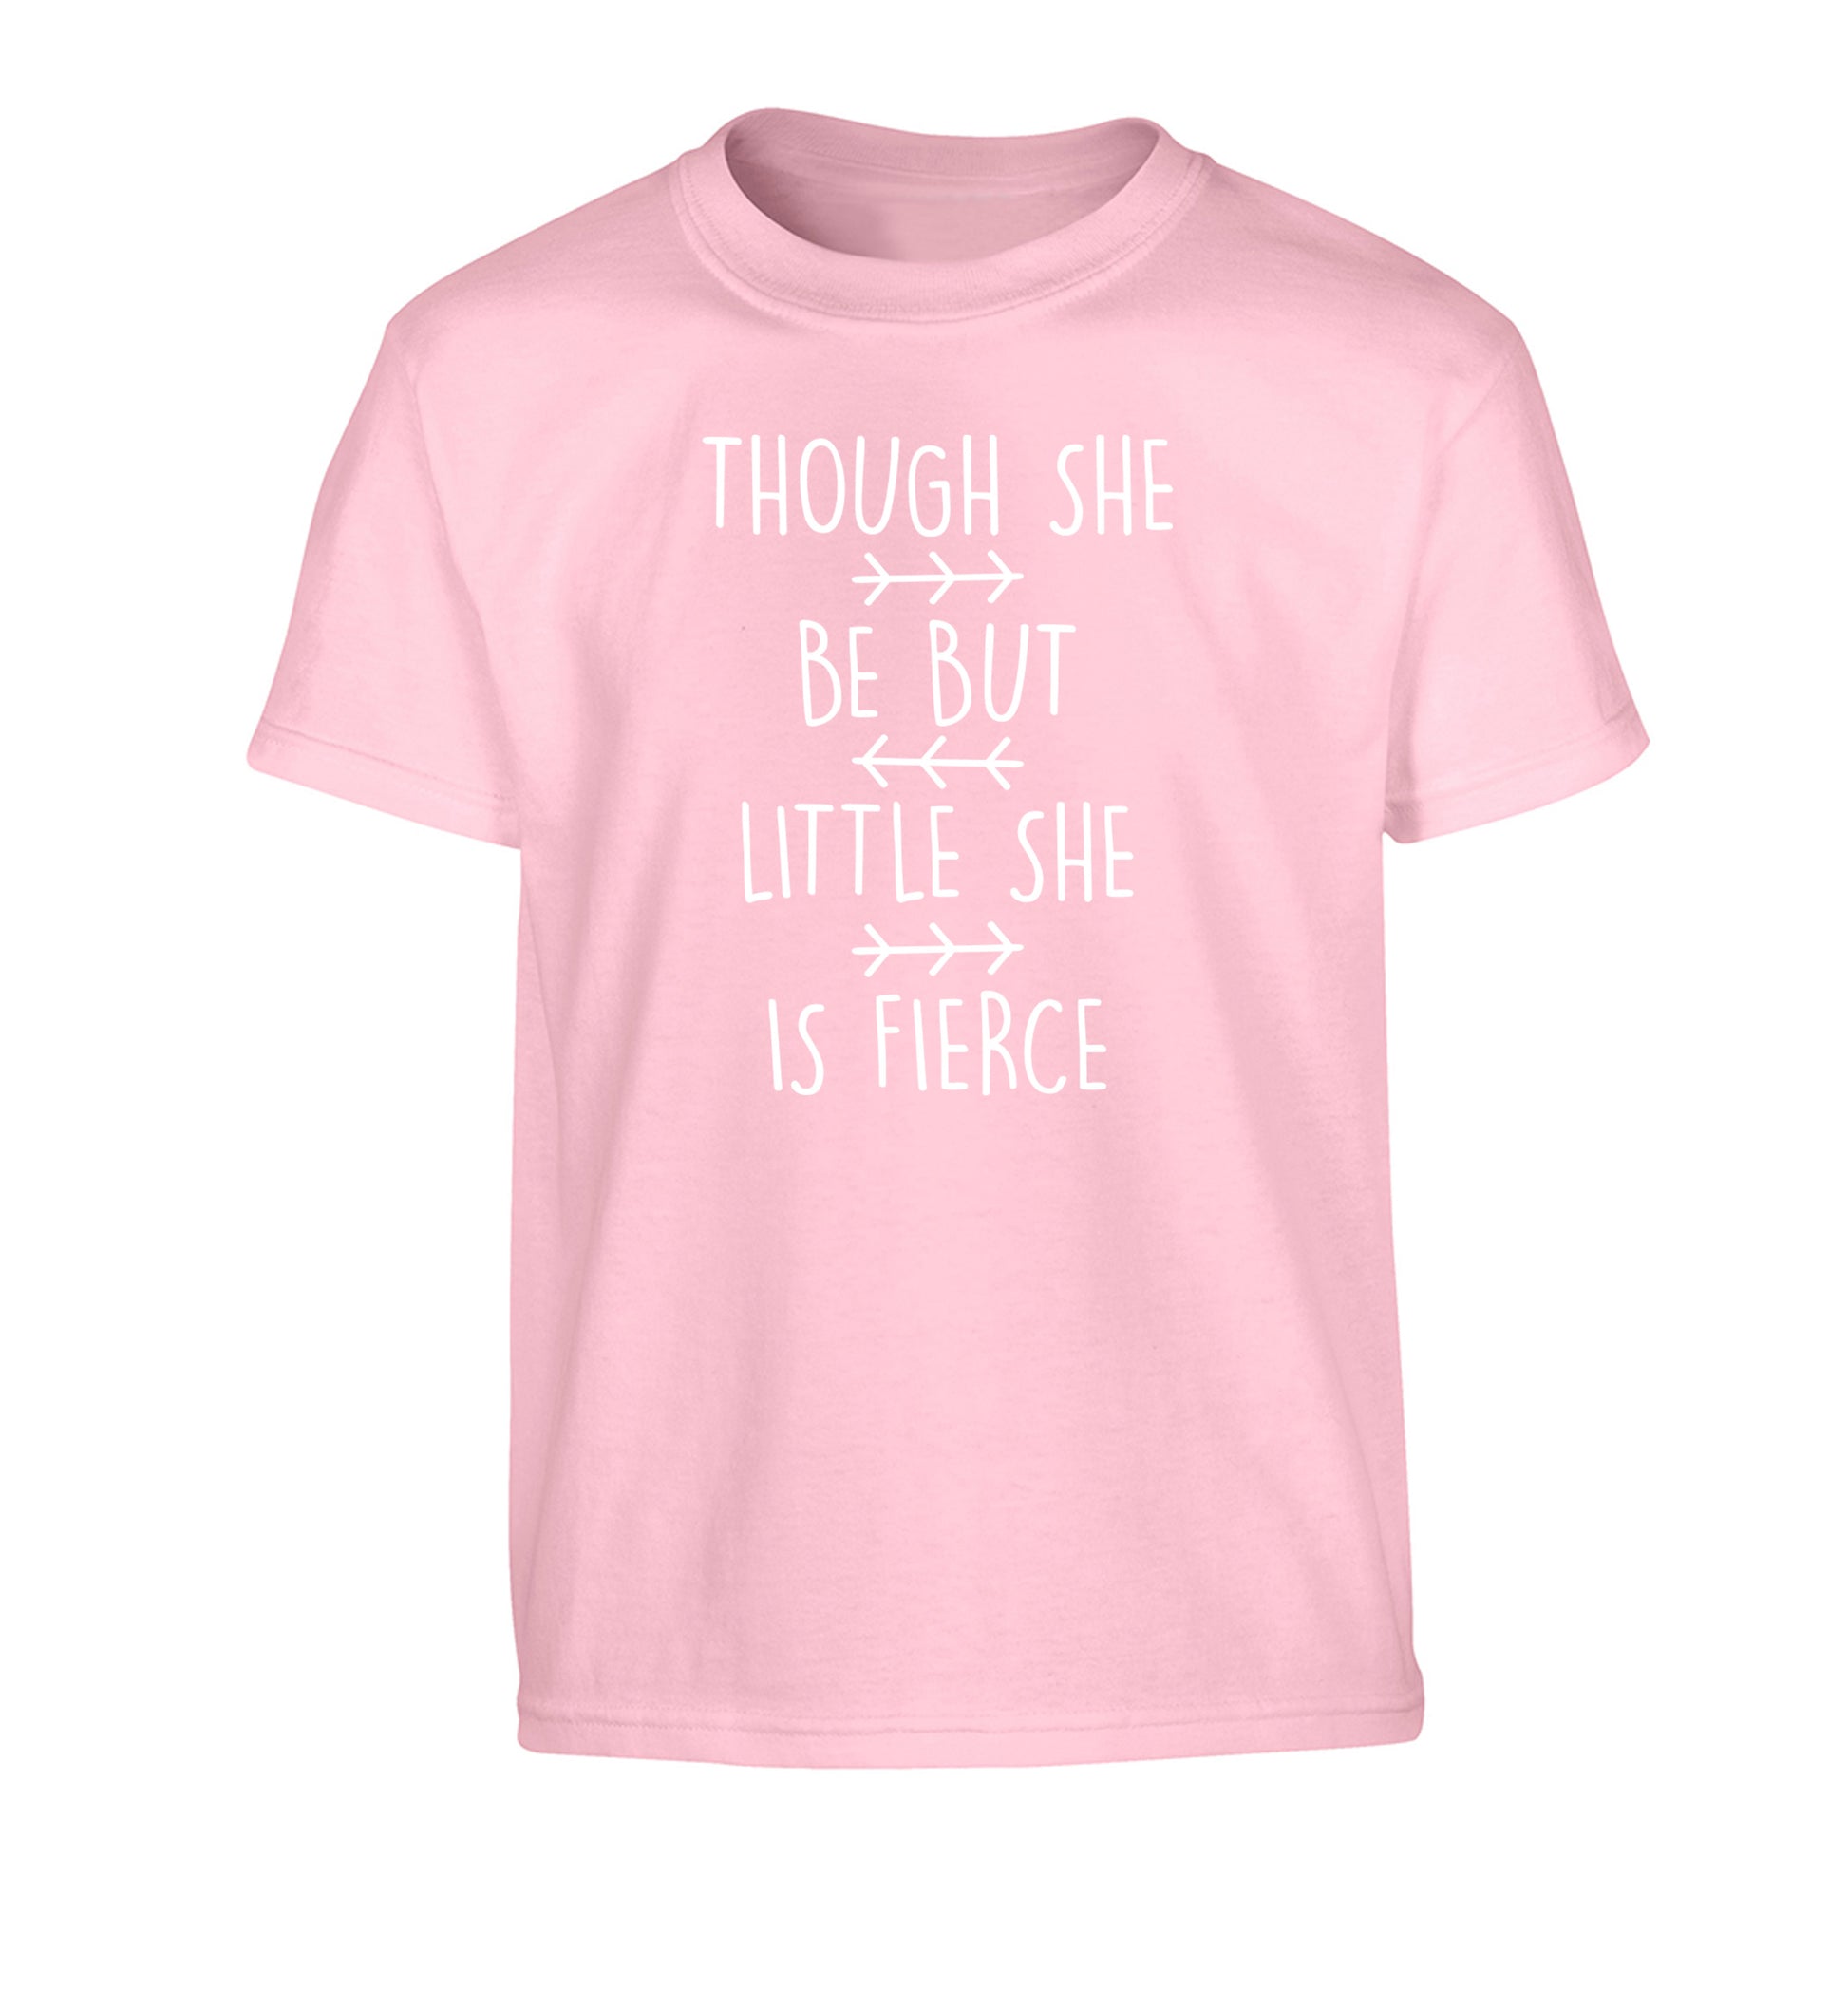 Though she be little she be fierce Children's light pink Tshirt 12-14 Years